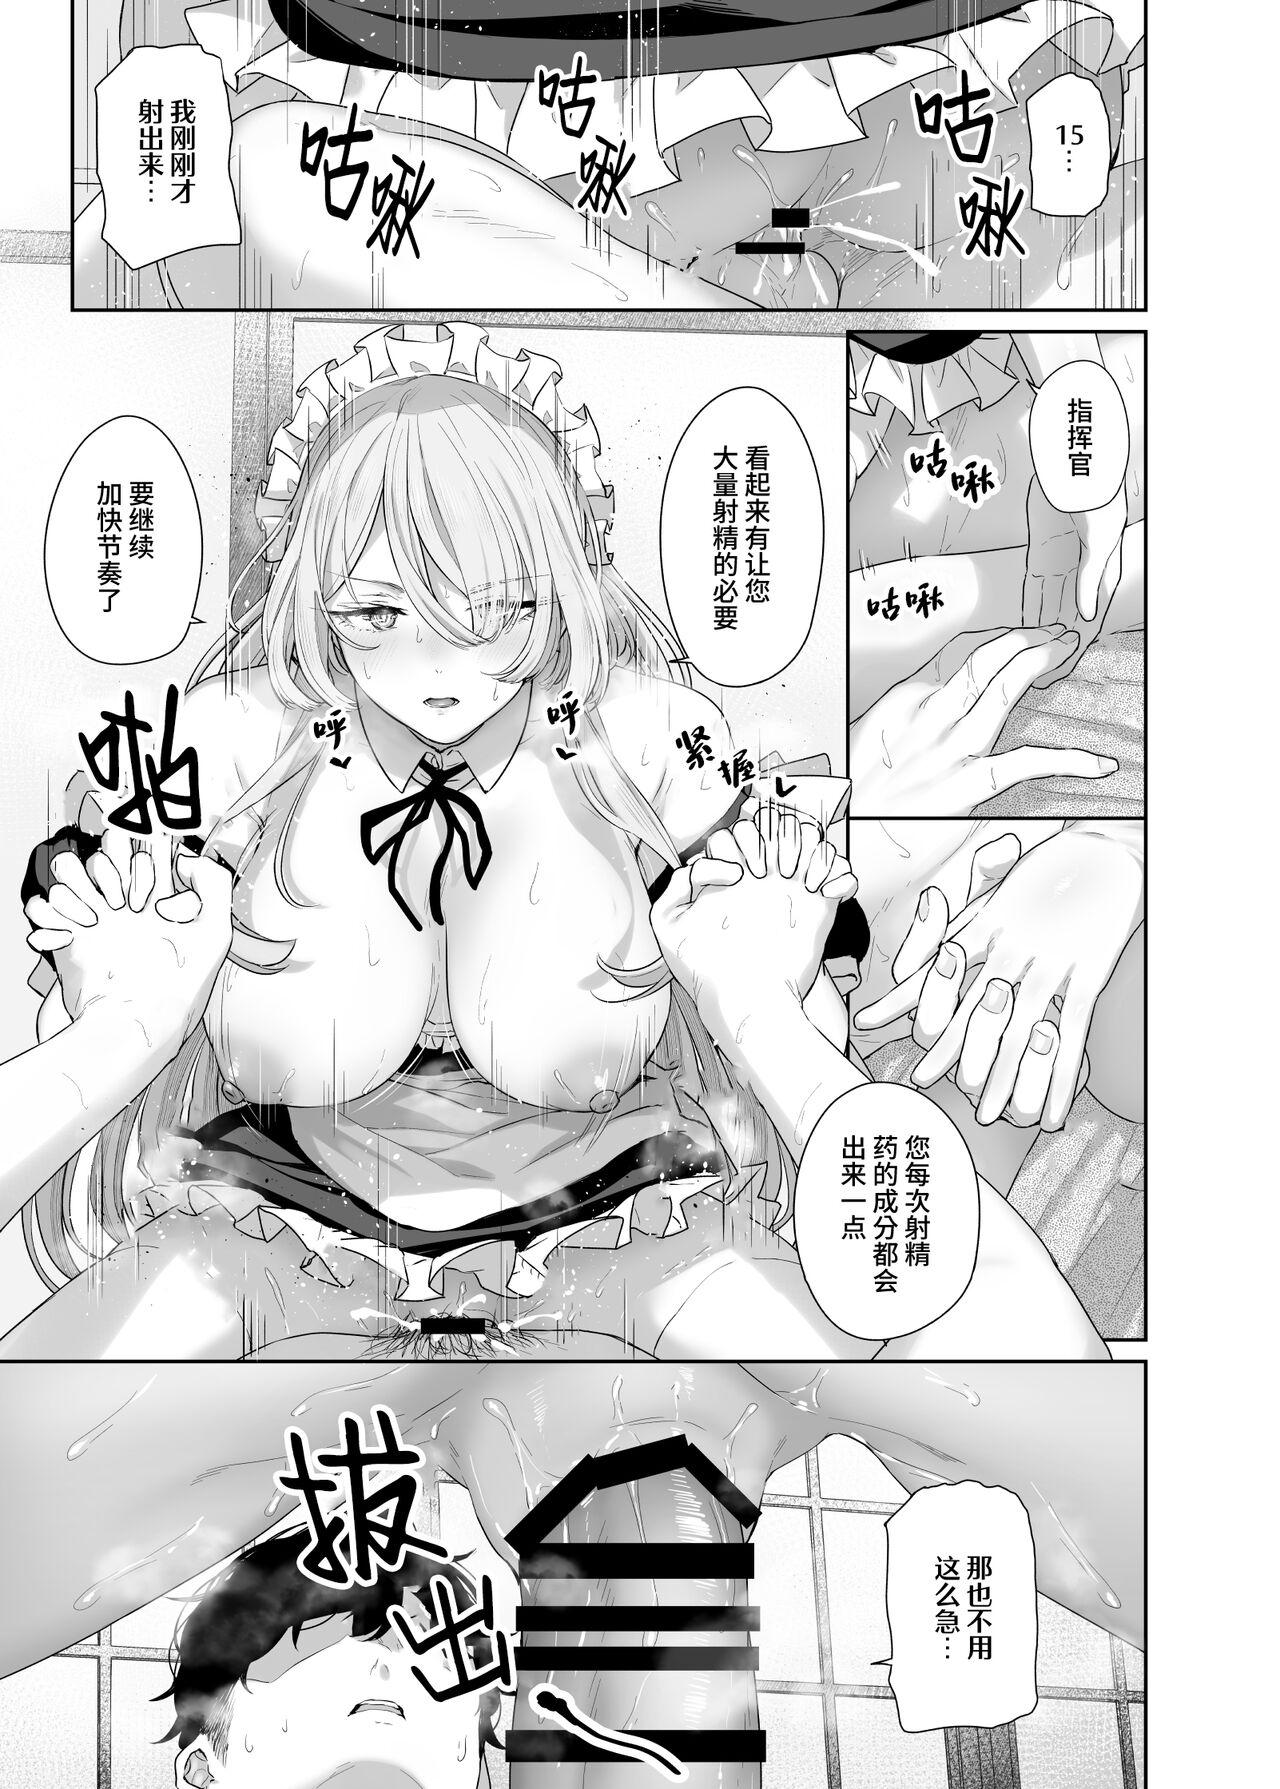 Nude AK15の進捗3 - Girls frontline Slapping - Page 8